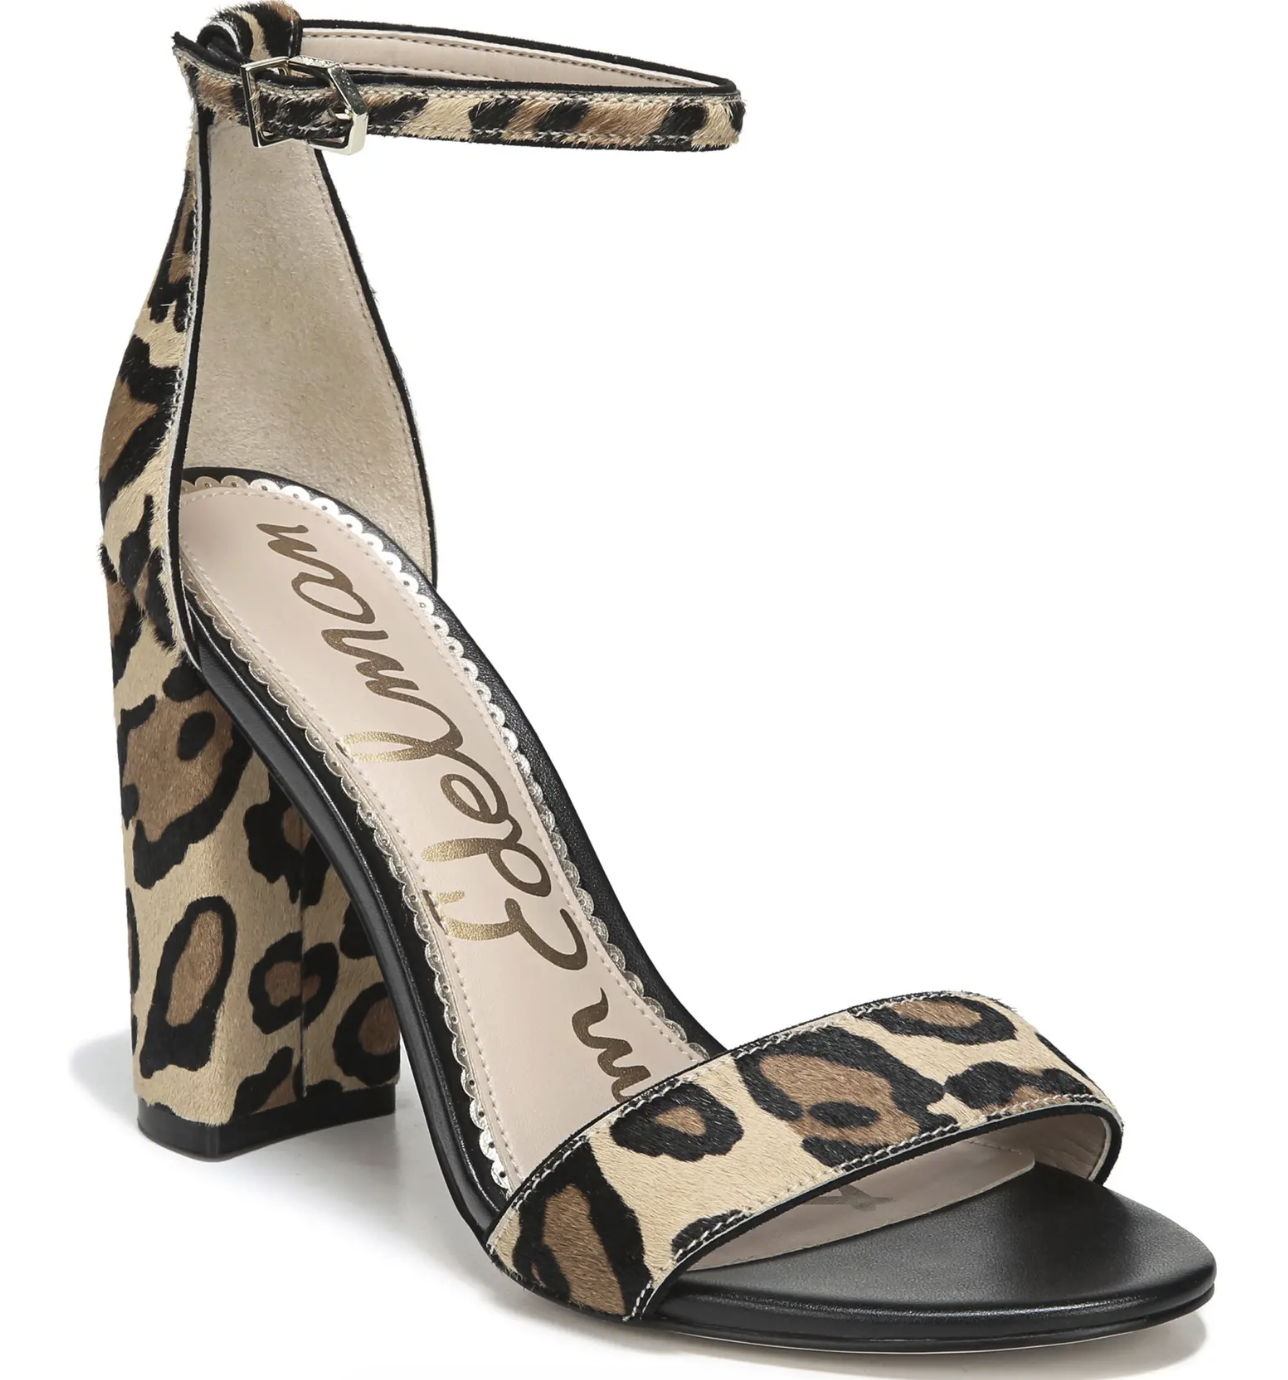 the shows with calf hair and the animal print. they have a chunky heels